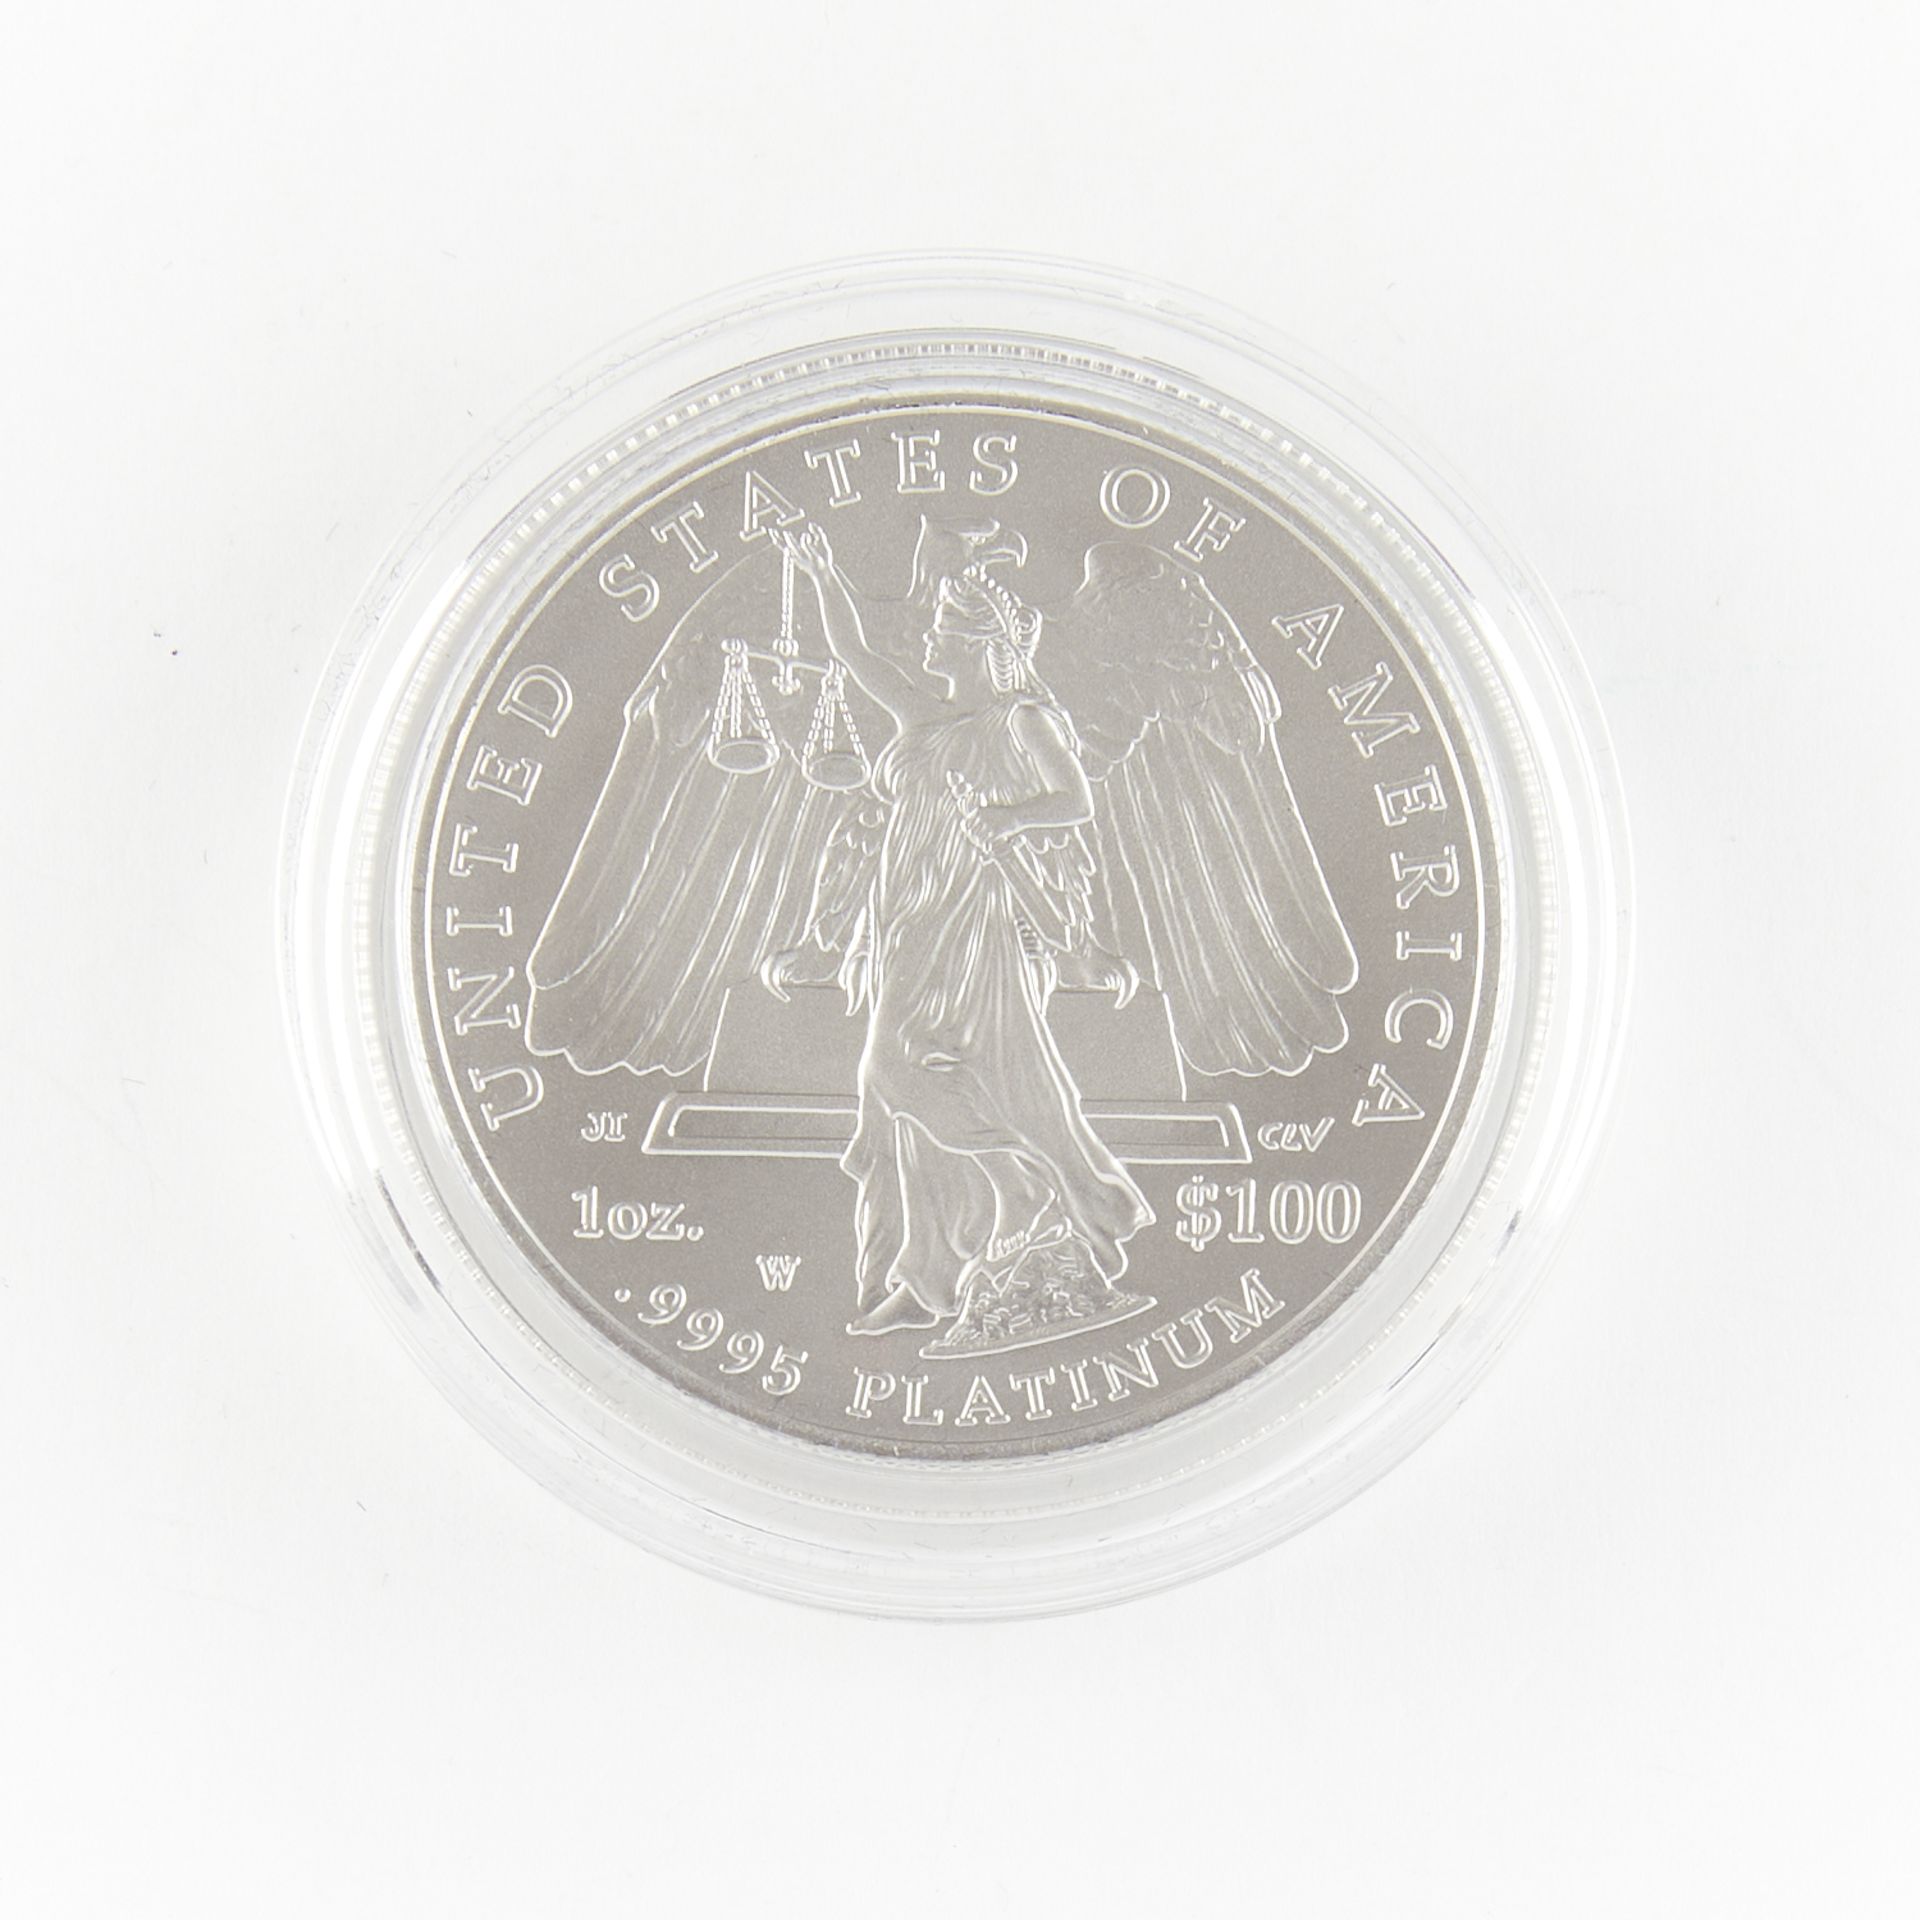 2008 $100 1 oz. Platinum Statue of Liberty Proof Coin - Image 3 of 3